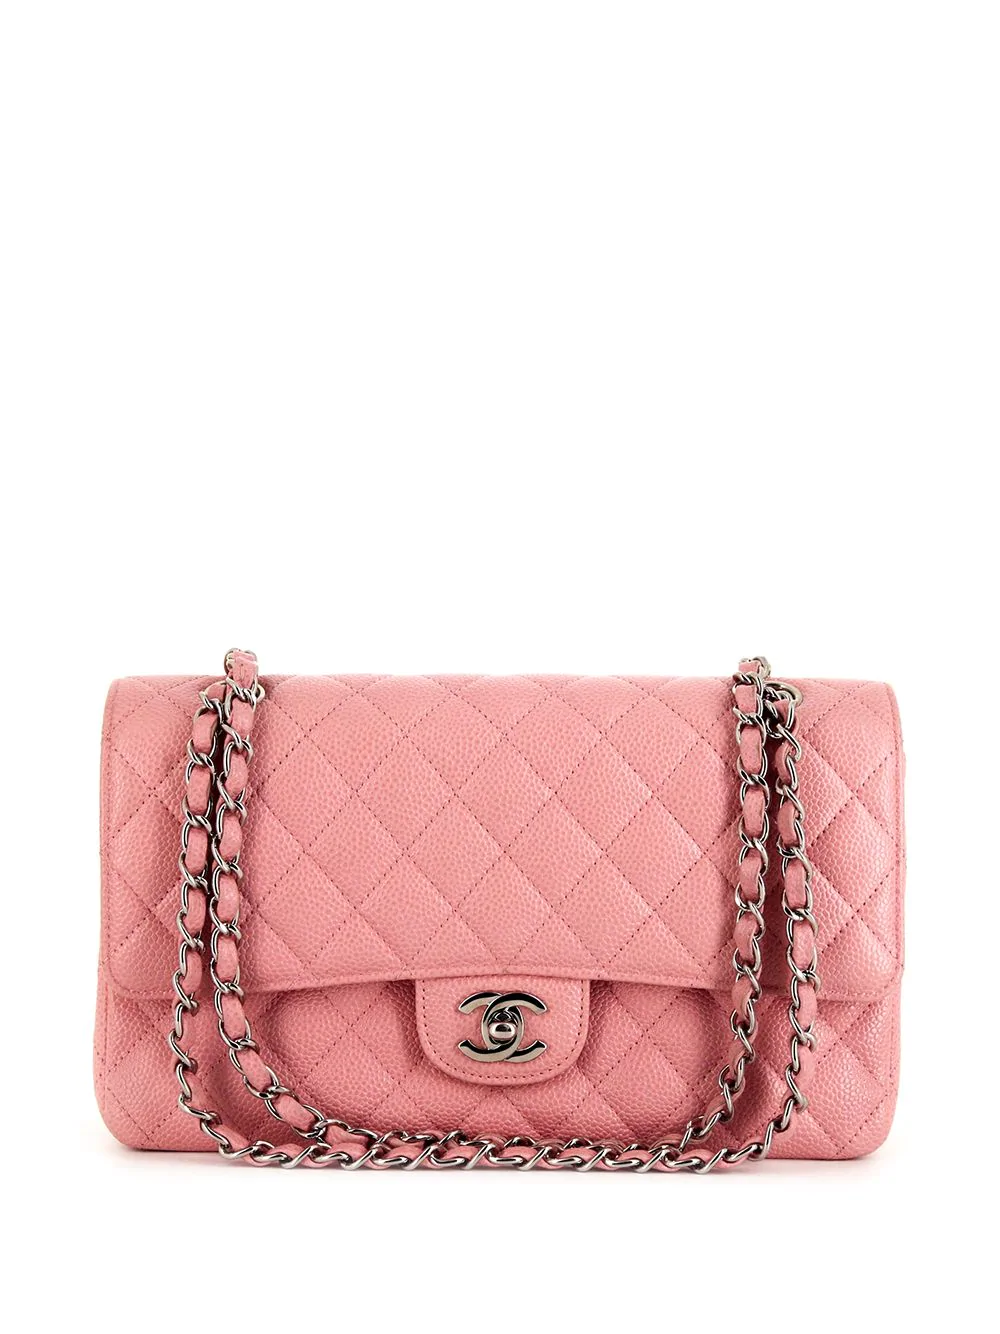 TÚI Chanel Pinky caviar quilted shoulder bag